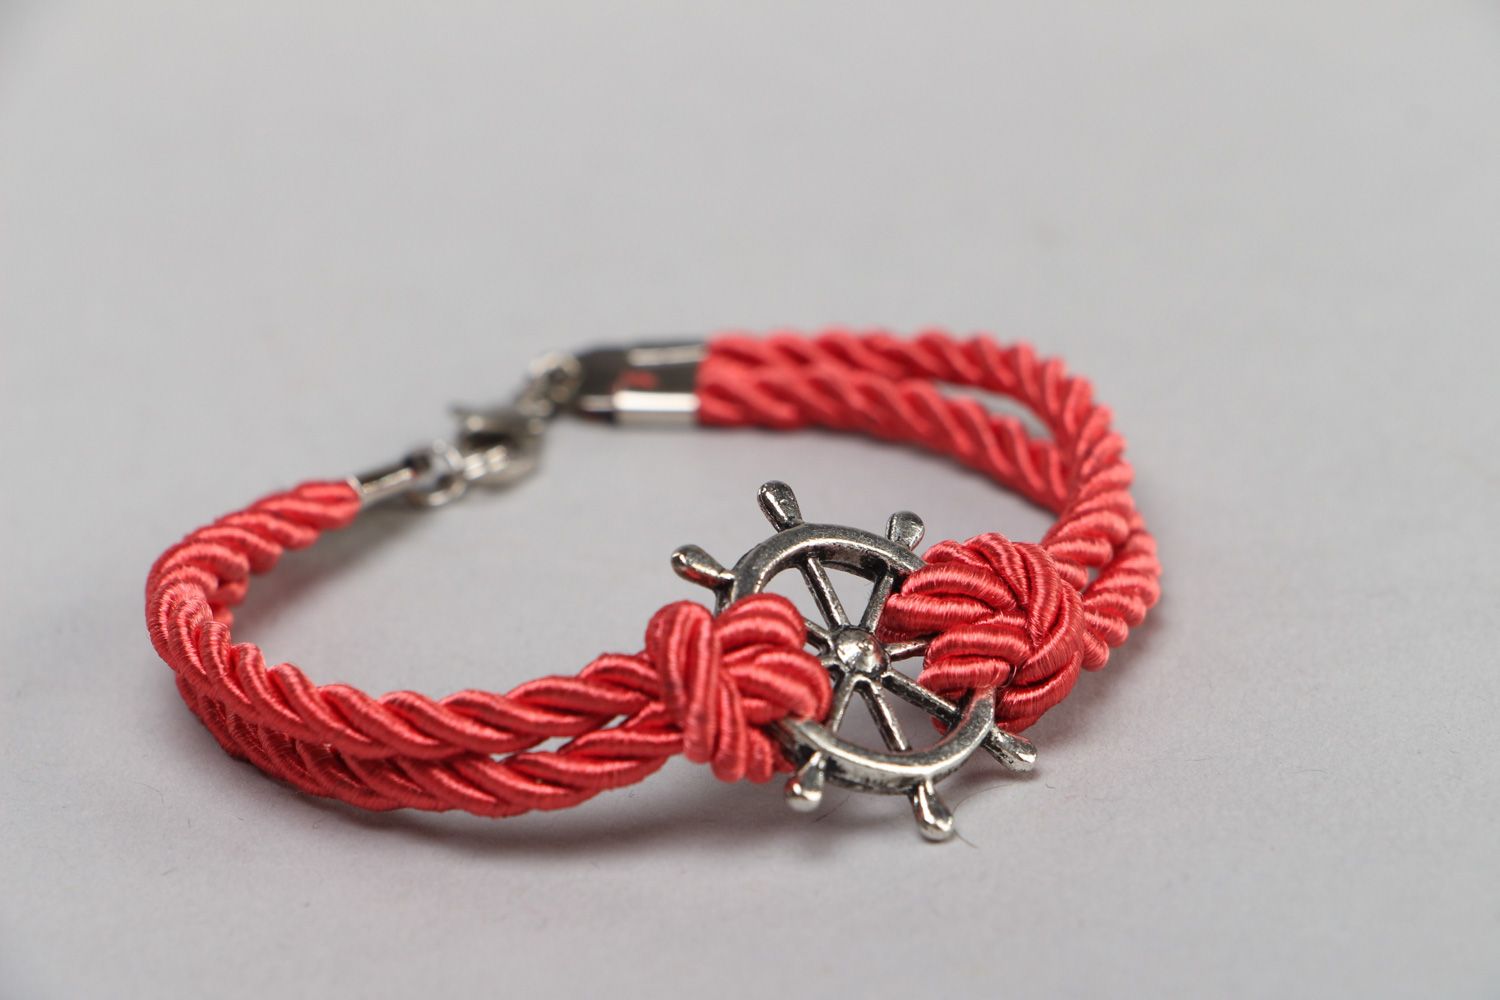 Handmade thin wrist bracelet with red cord and metal steering wheel unisex photo 1